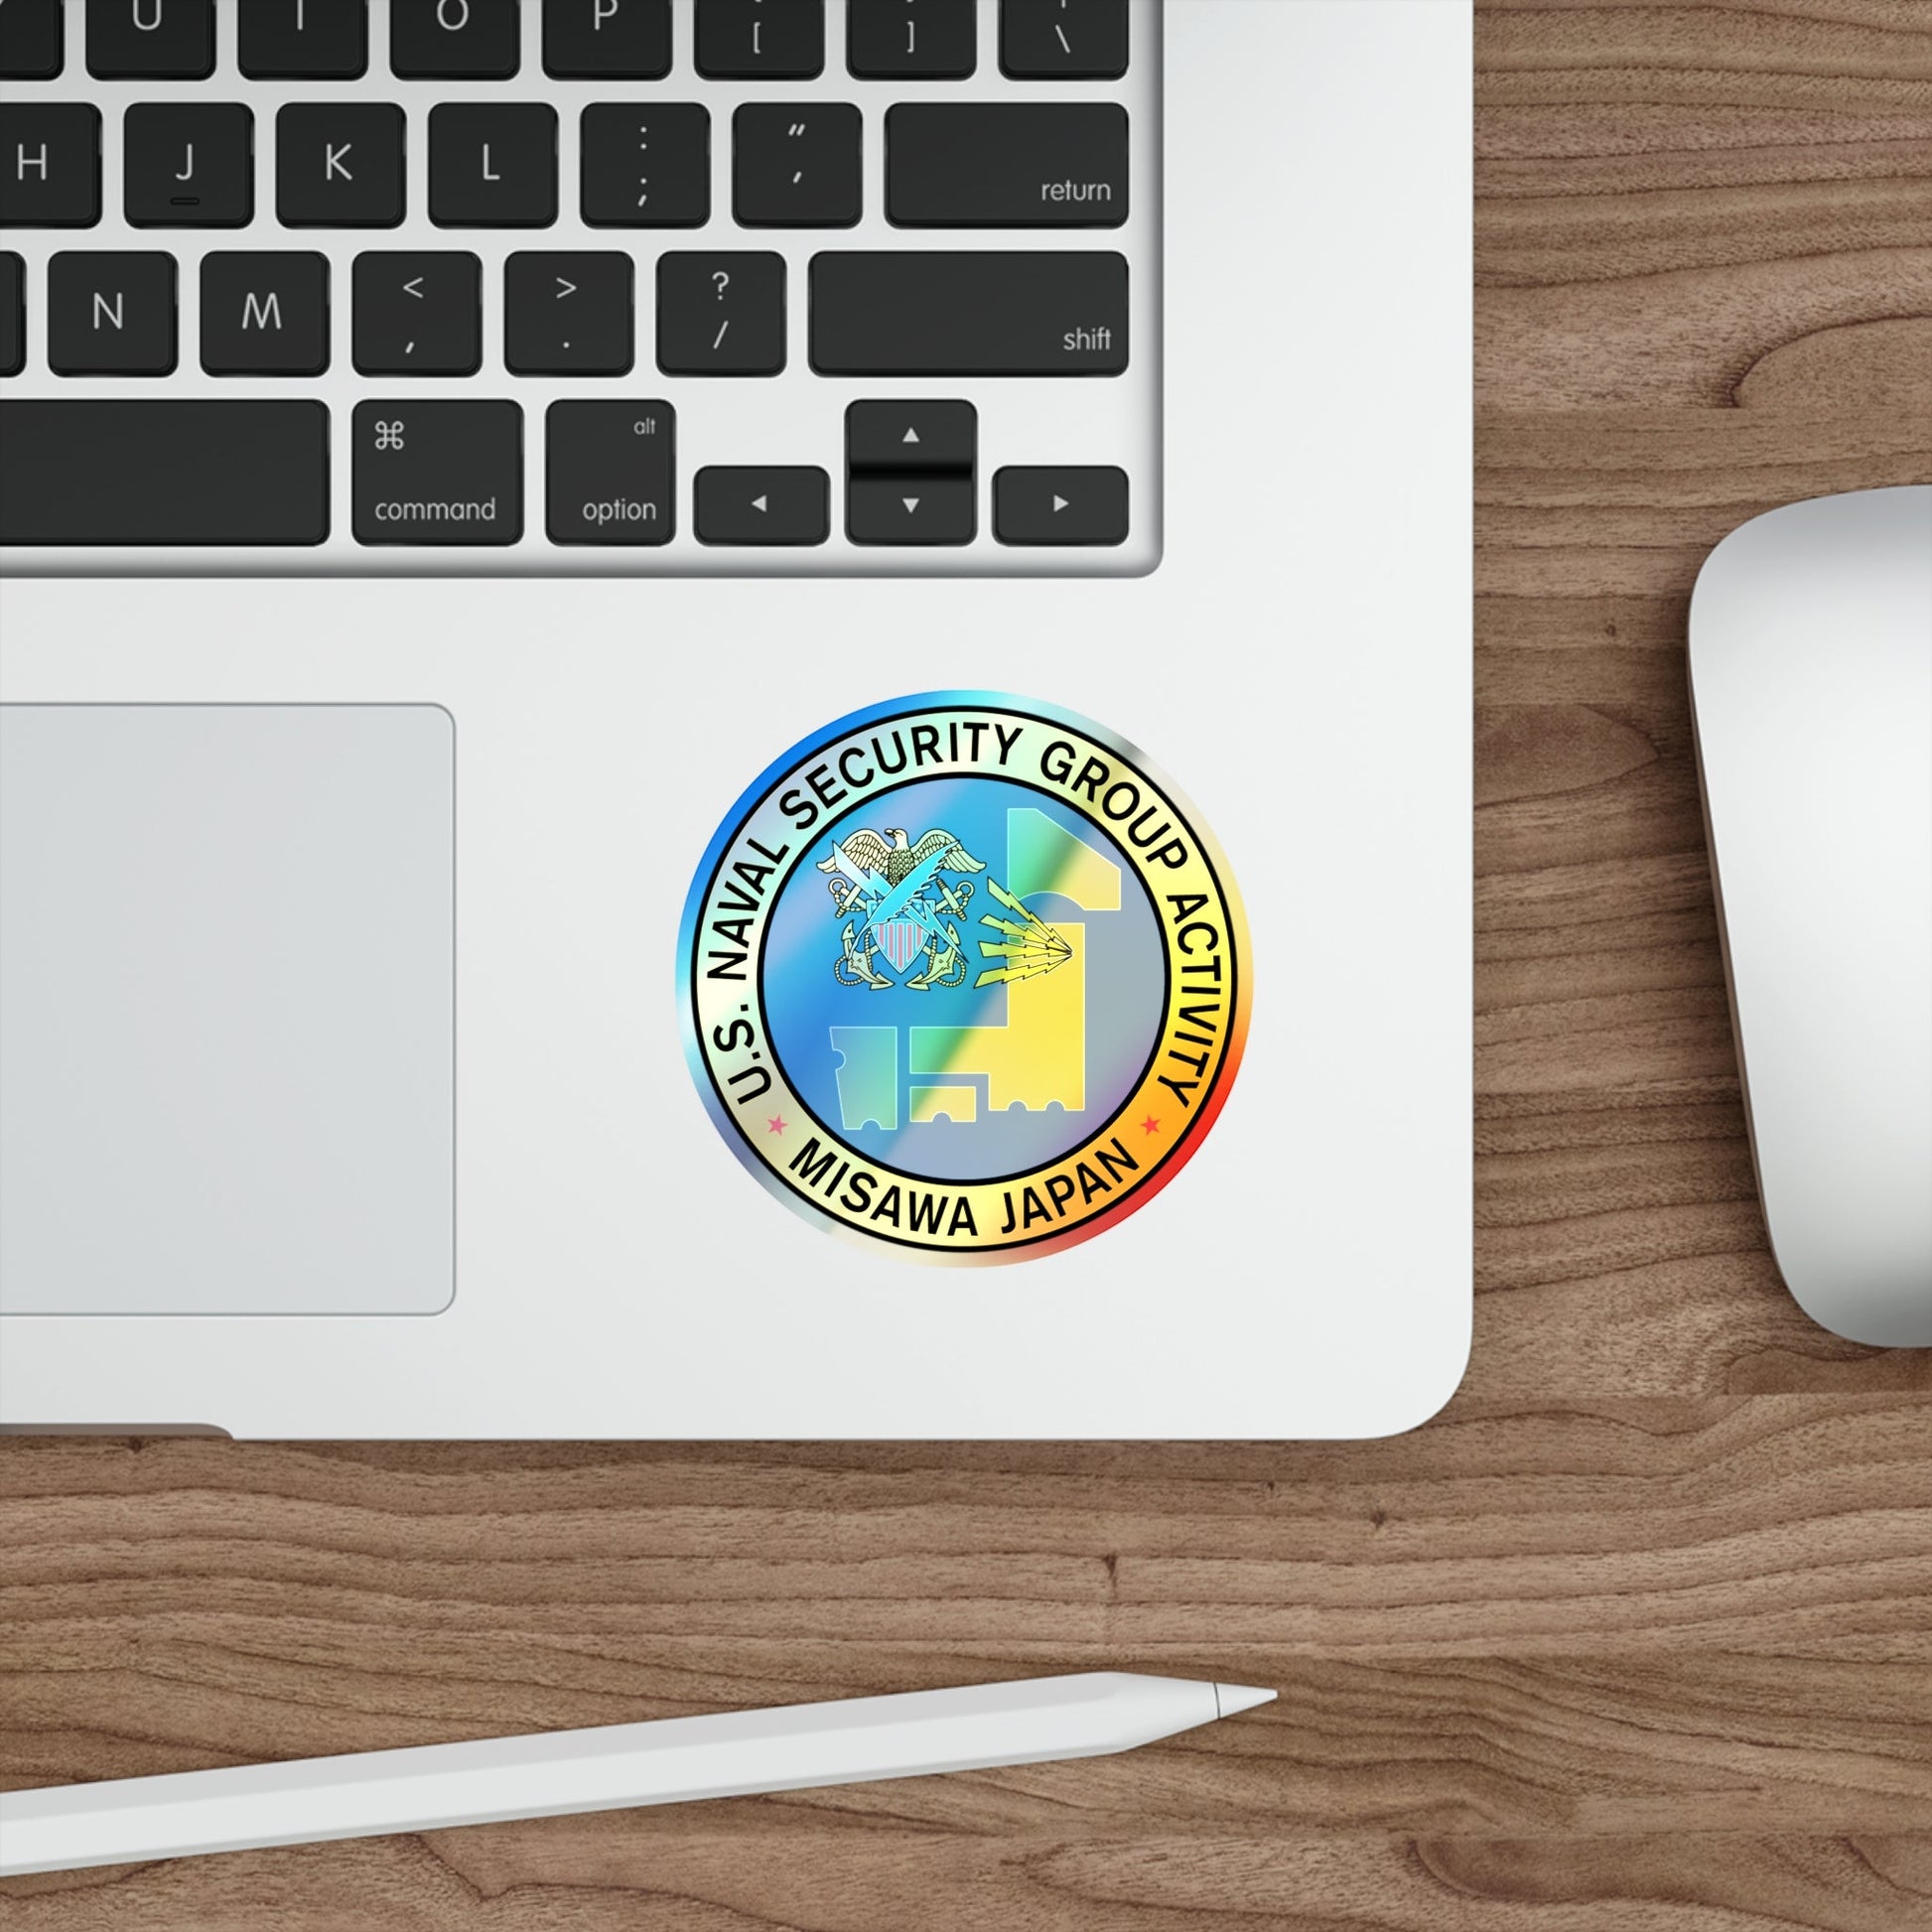 US Naval Security Group Activity Misawa Japan (U.S. Navy) Holographic STICKER Die-Cut Vinyl Decal-The Sticker Space